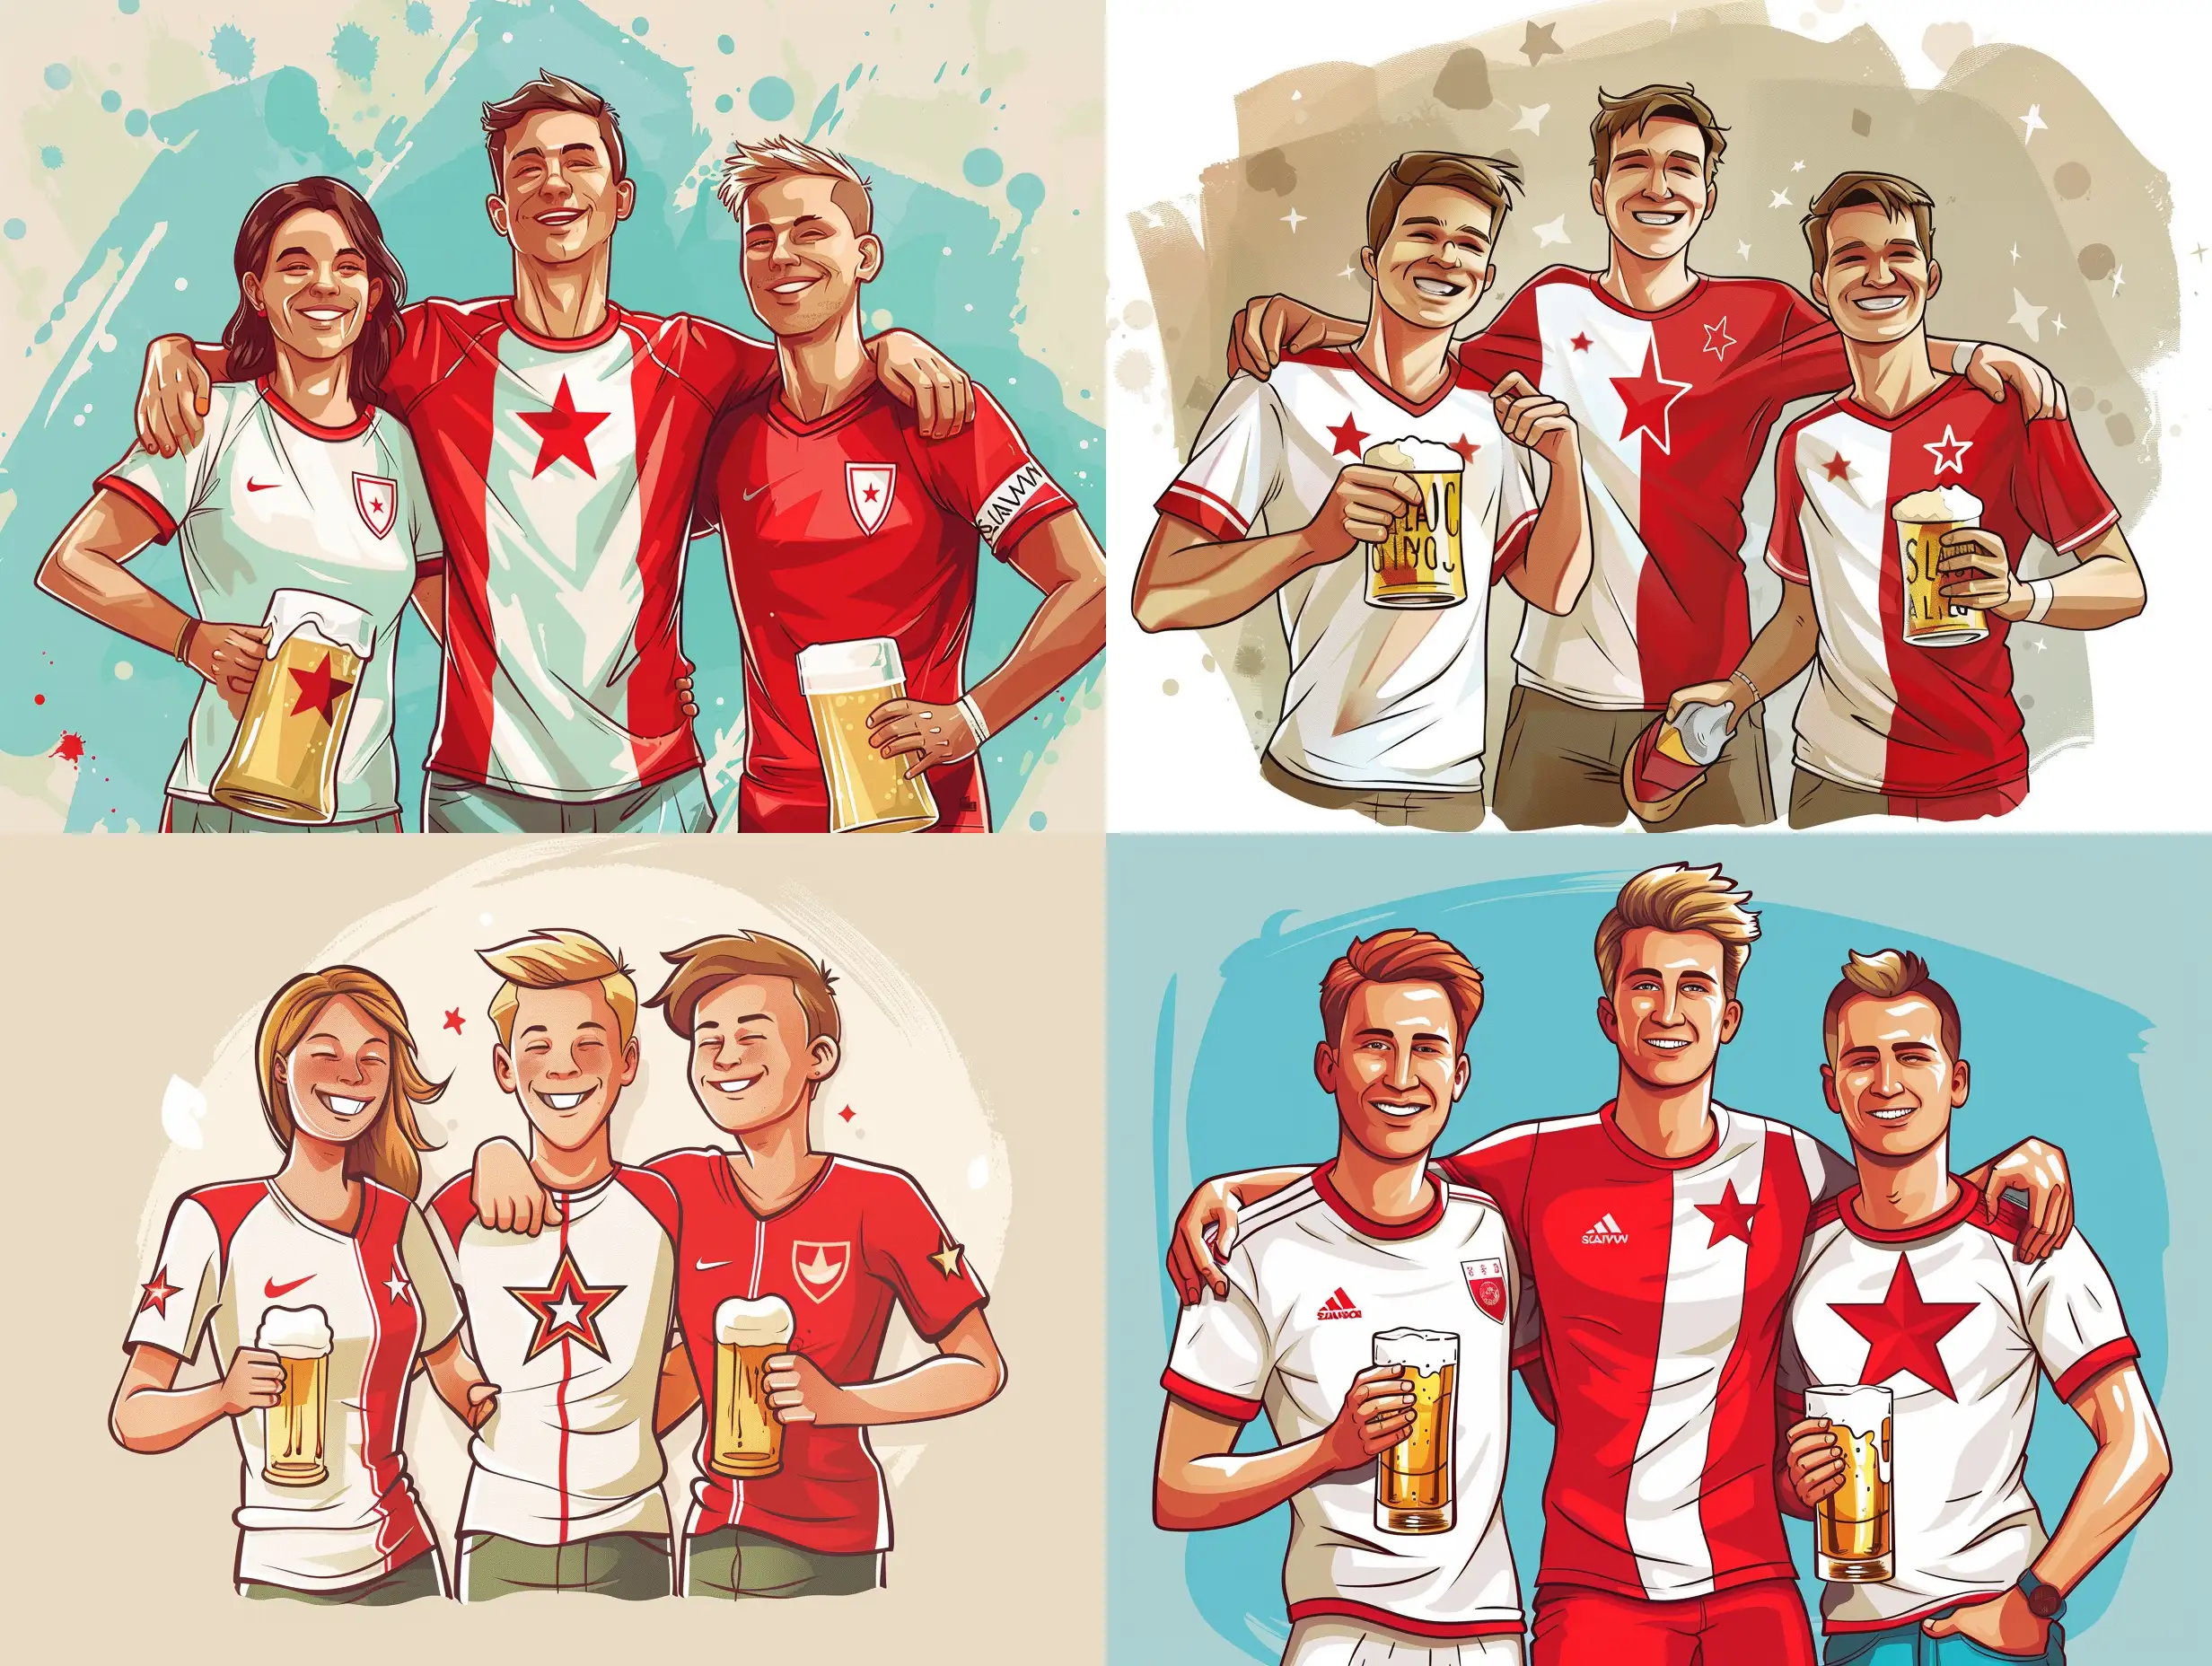 Cheering-Slavia-Prague-Football-Fans-with-Beer-in-Red-and-White-Split-Jerseys